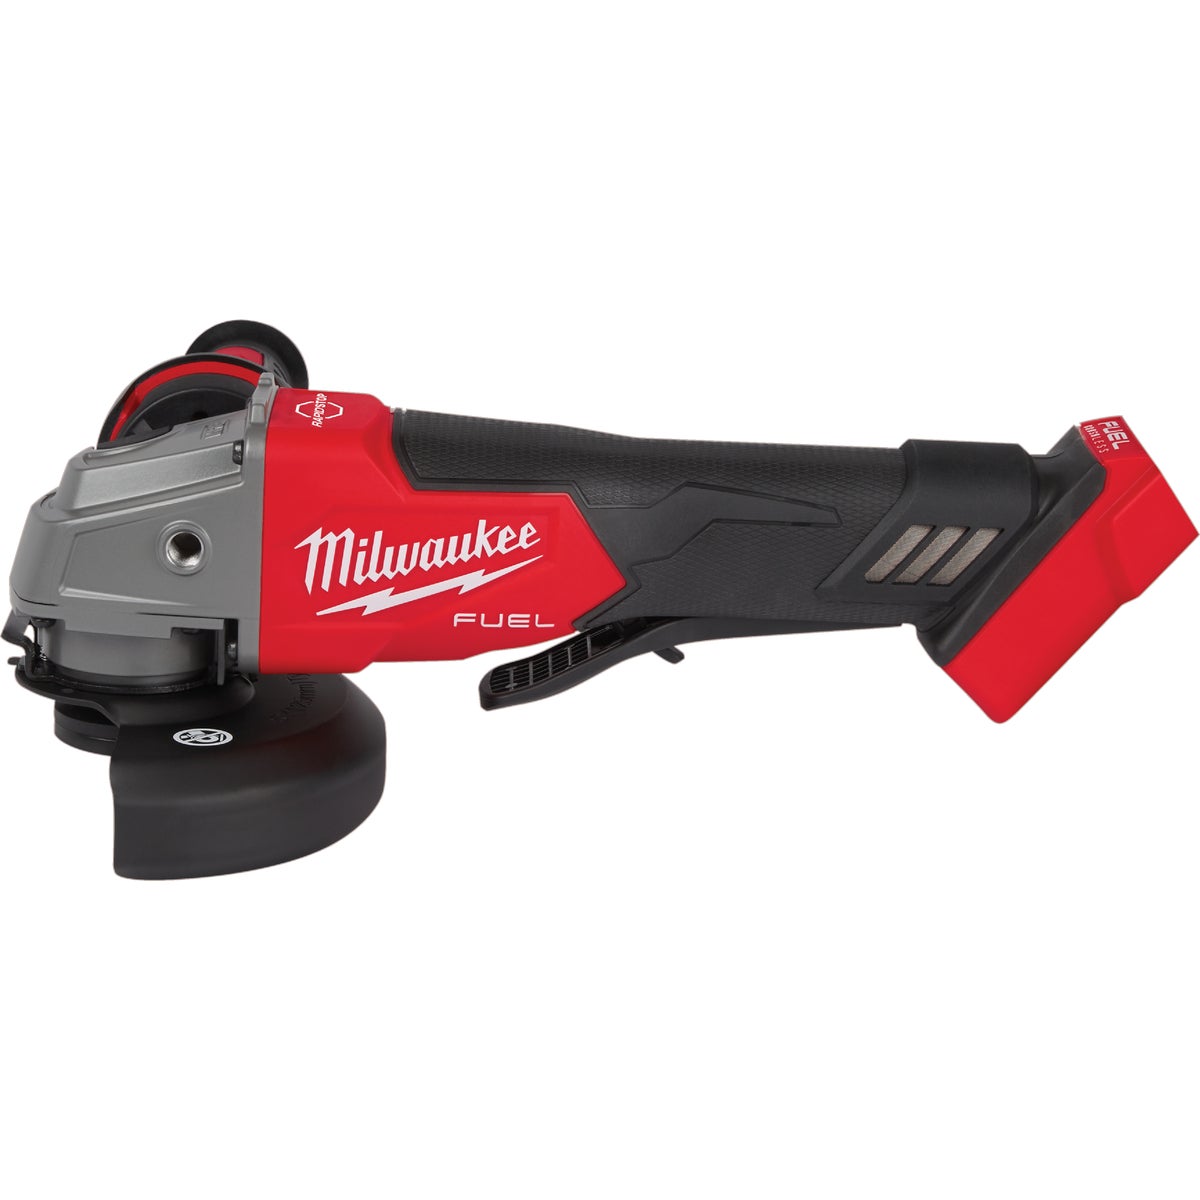 Milwaukee M18 FUEL 18-Volt Lithium-Ion 4-1/2 In. - 5 In. Brushless Cordless Angle Grinder with Paddle Switch, No-Lock (Tool Only)